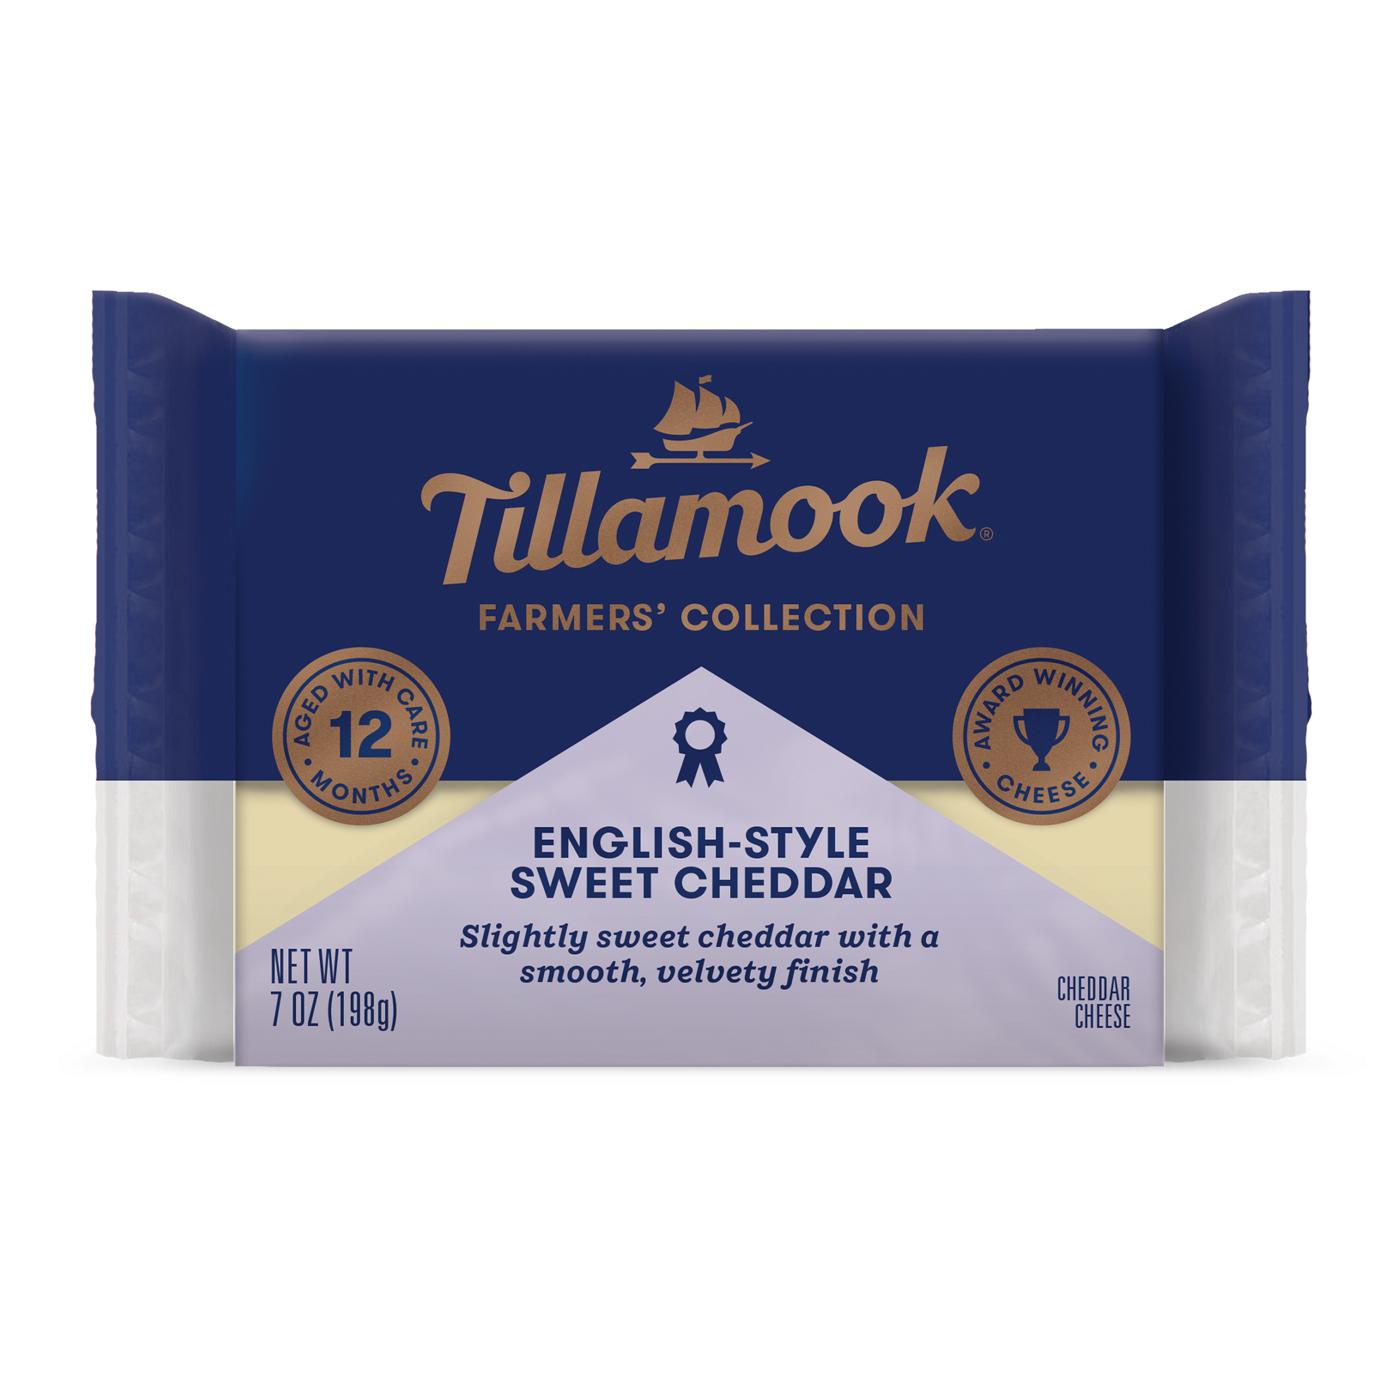 Tillamook Farmers' Collection English-Style Sweet Cheddar Cheese; image 1 of 6